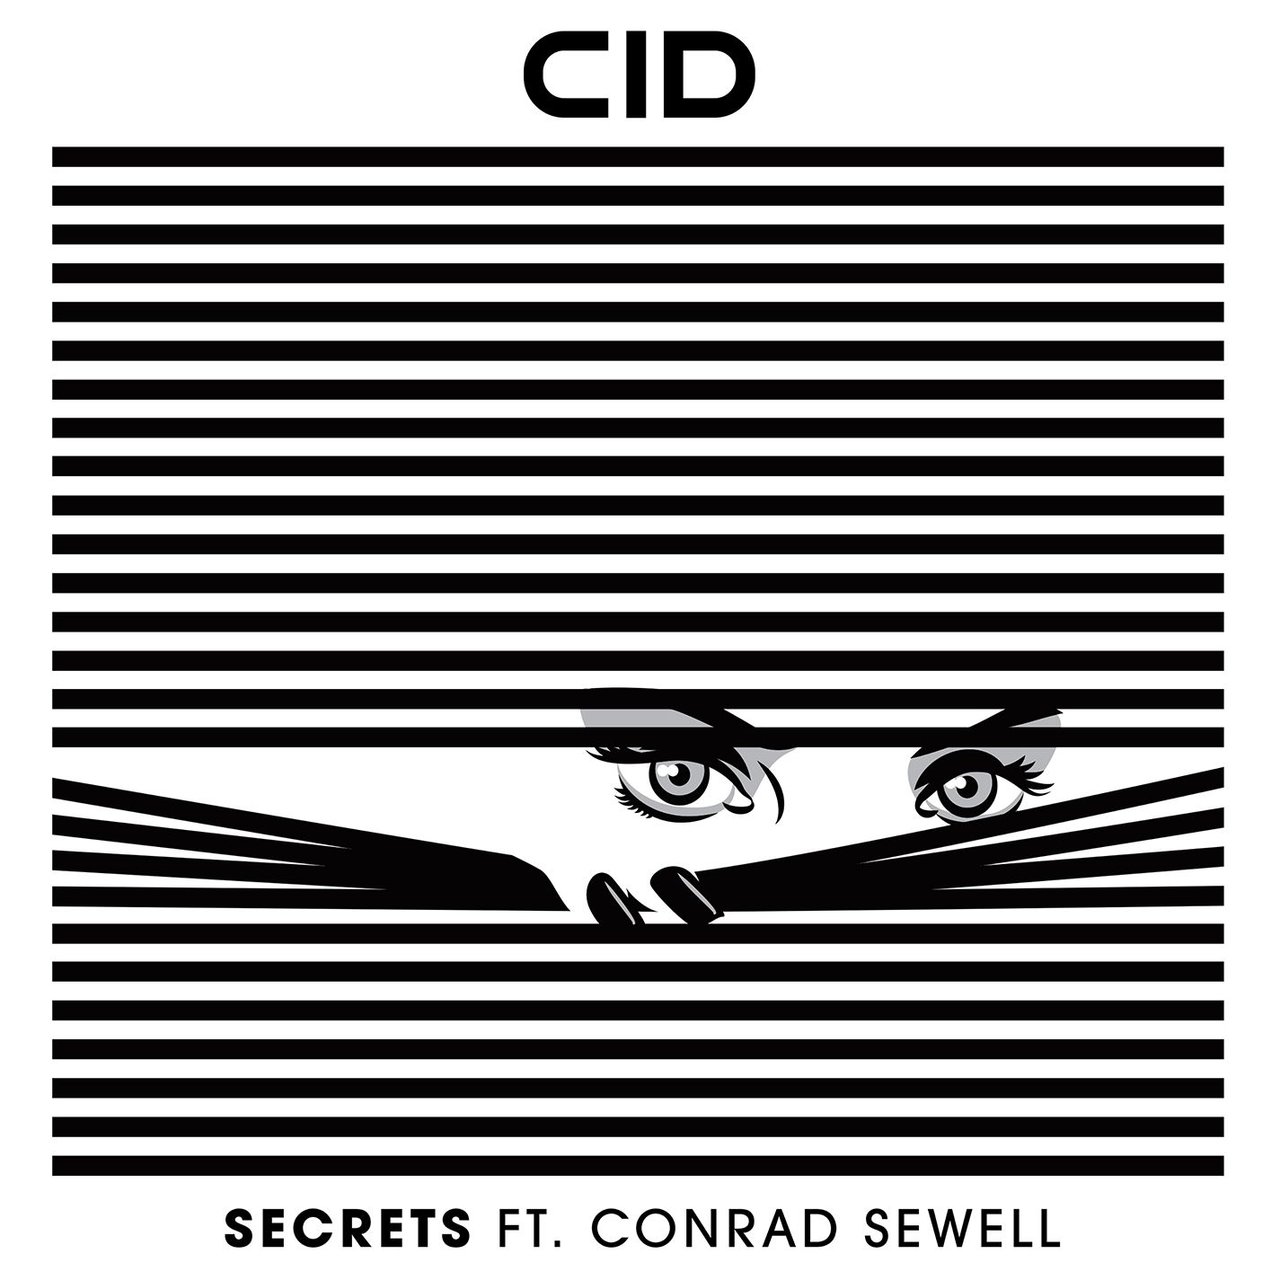 CID ft. featuring Conrad Sewell Secrets cover artwork